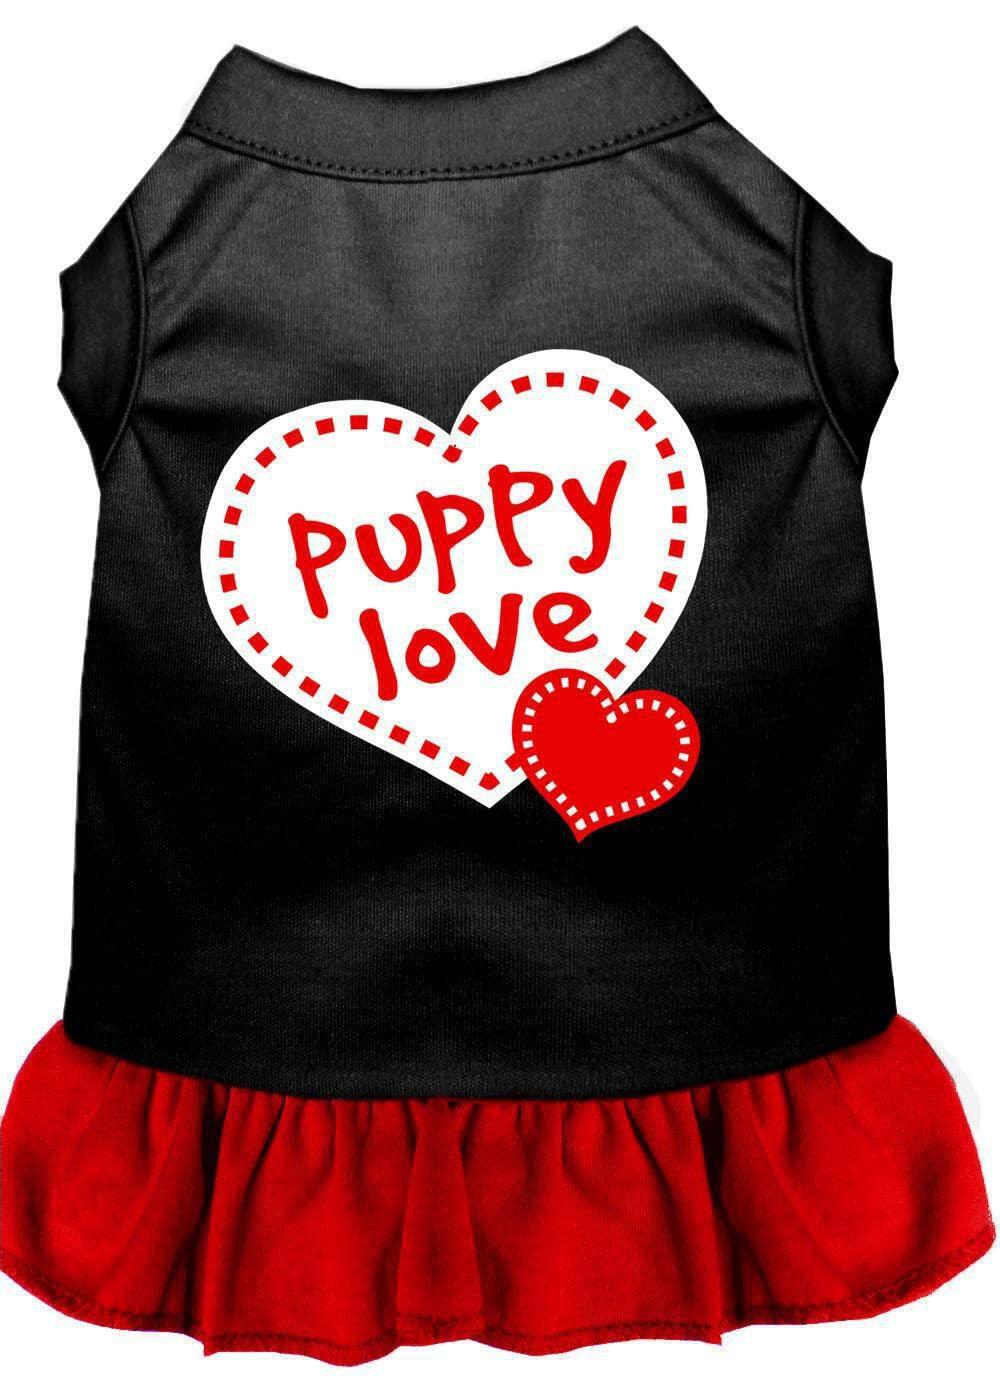 Mirage Pet Products 58-14 XXXLBKRD 20 Puppy Love Dresses Black with Red, 3X-Large